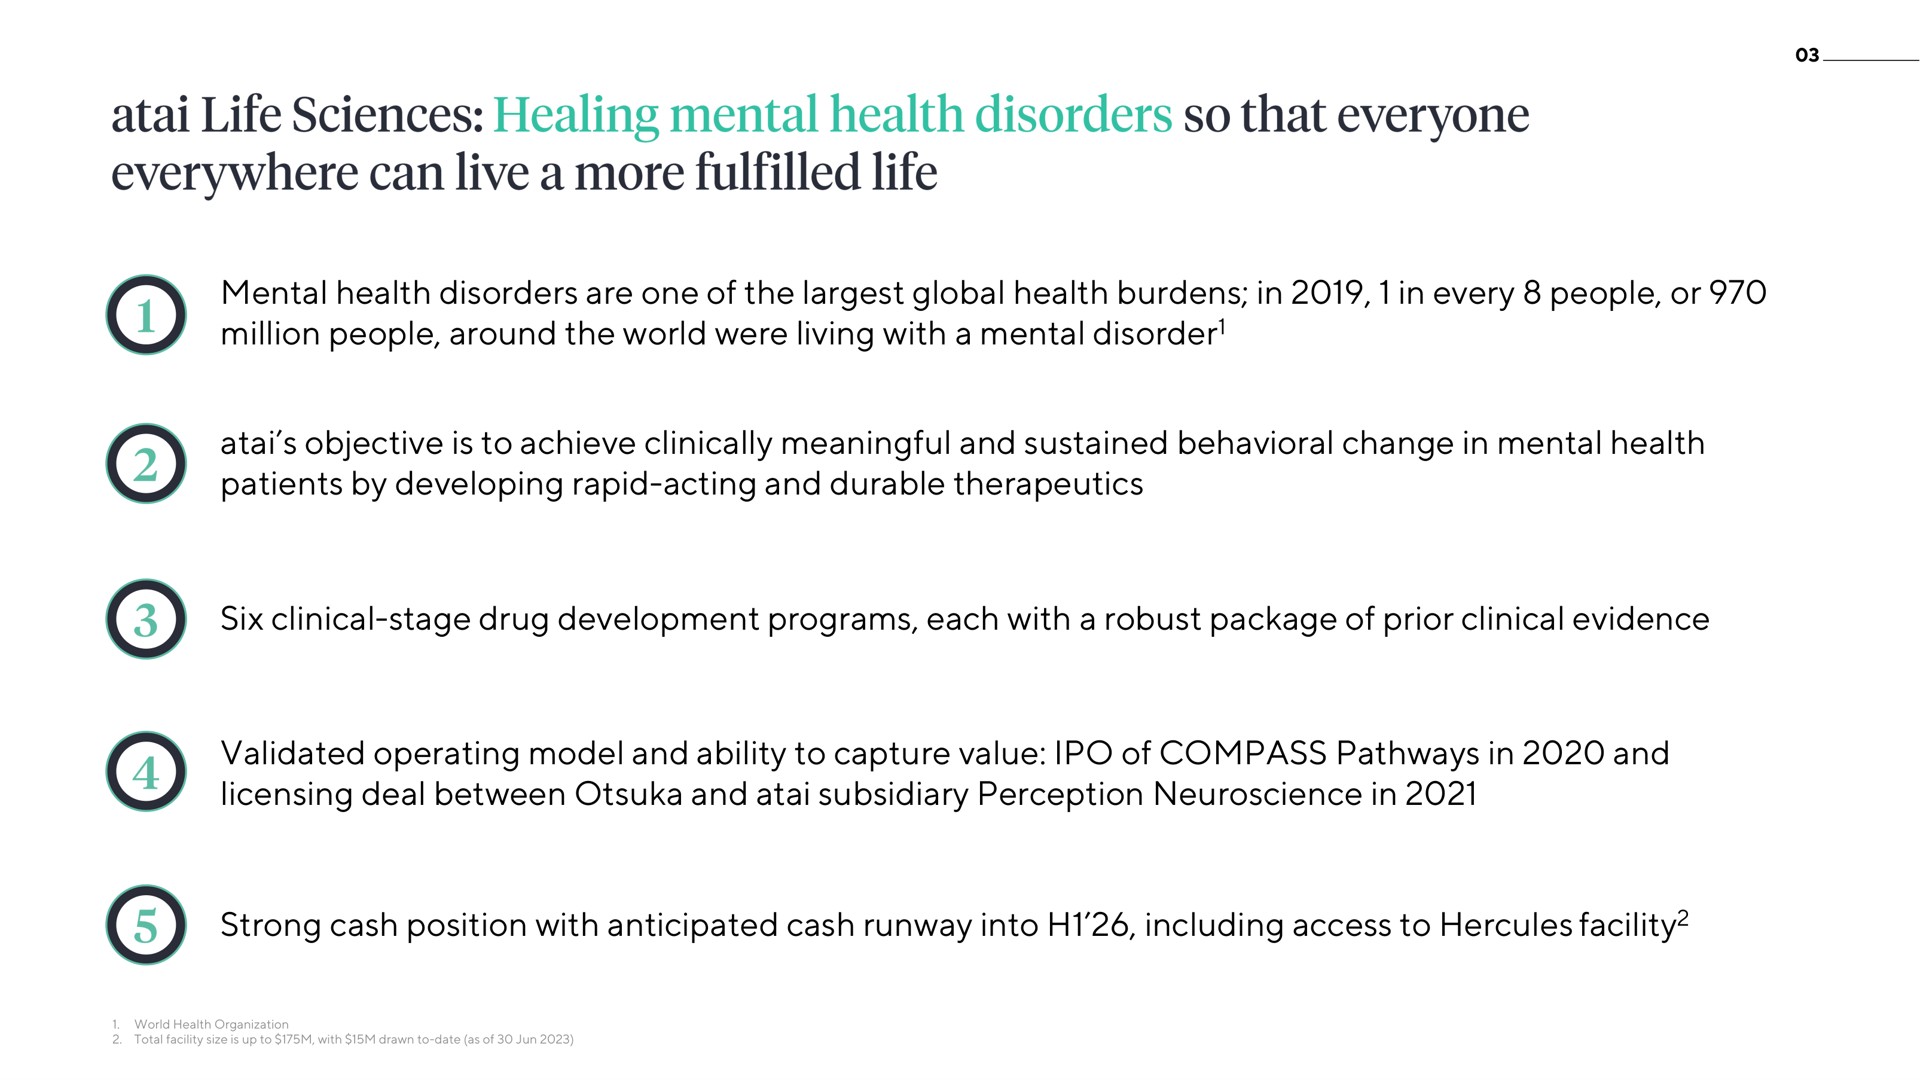 mental health disorders are one of the global health burdens in in every people or million people around the world were living with a mental disorder objective is to achieve clinically meaningful and sustained behavioral change in mental health patients by developing rapid acting and durable therapeutics six clinical stage drug development programs each with a robust package of prior clinical evidence validated operating model and ability to capture value of compass pathways in and licensing deal between and subsidiary perception in strong cash position with anticipated cash runway into including access to facility life sciences healing so that everyone everywhere can live more life | ATAI